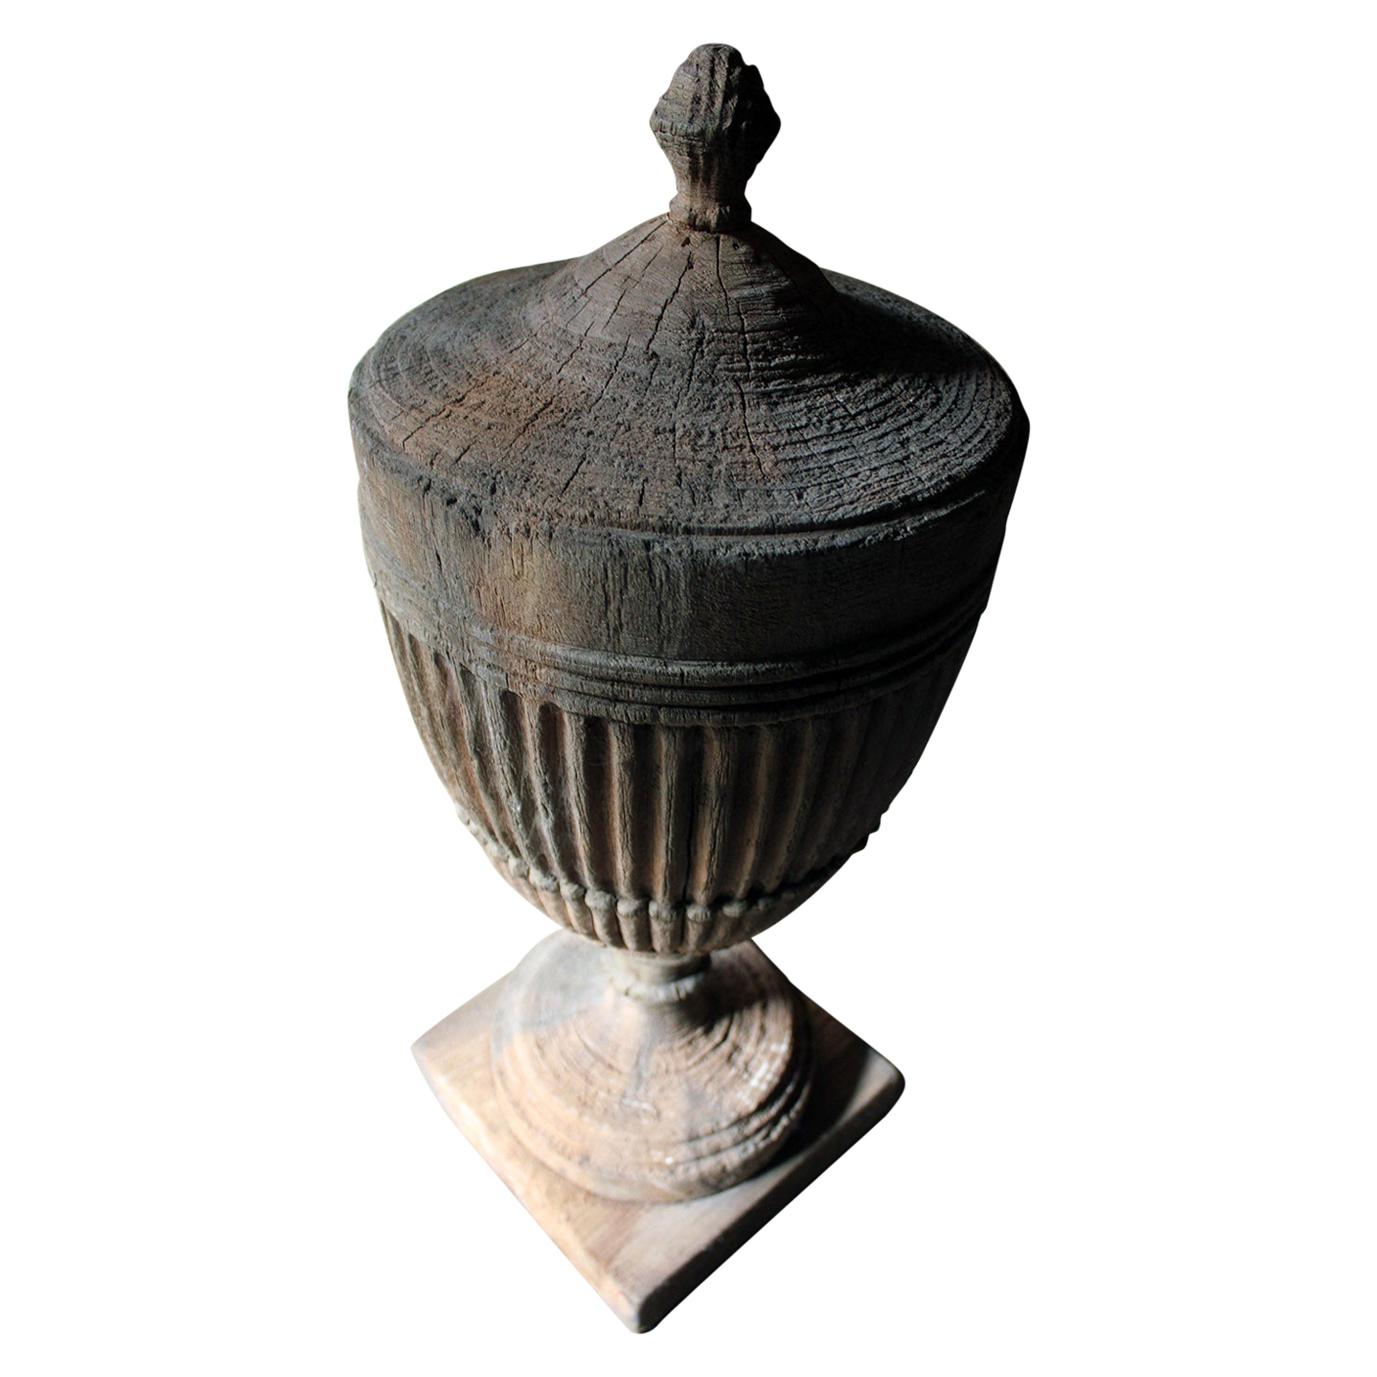 Regency Period Carved Stripped Pine Neoclassical Architectural Urn, circa 1800